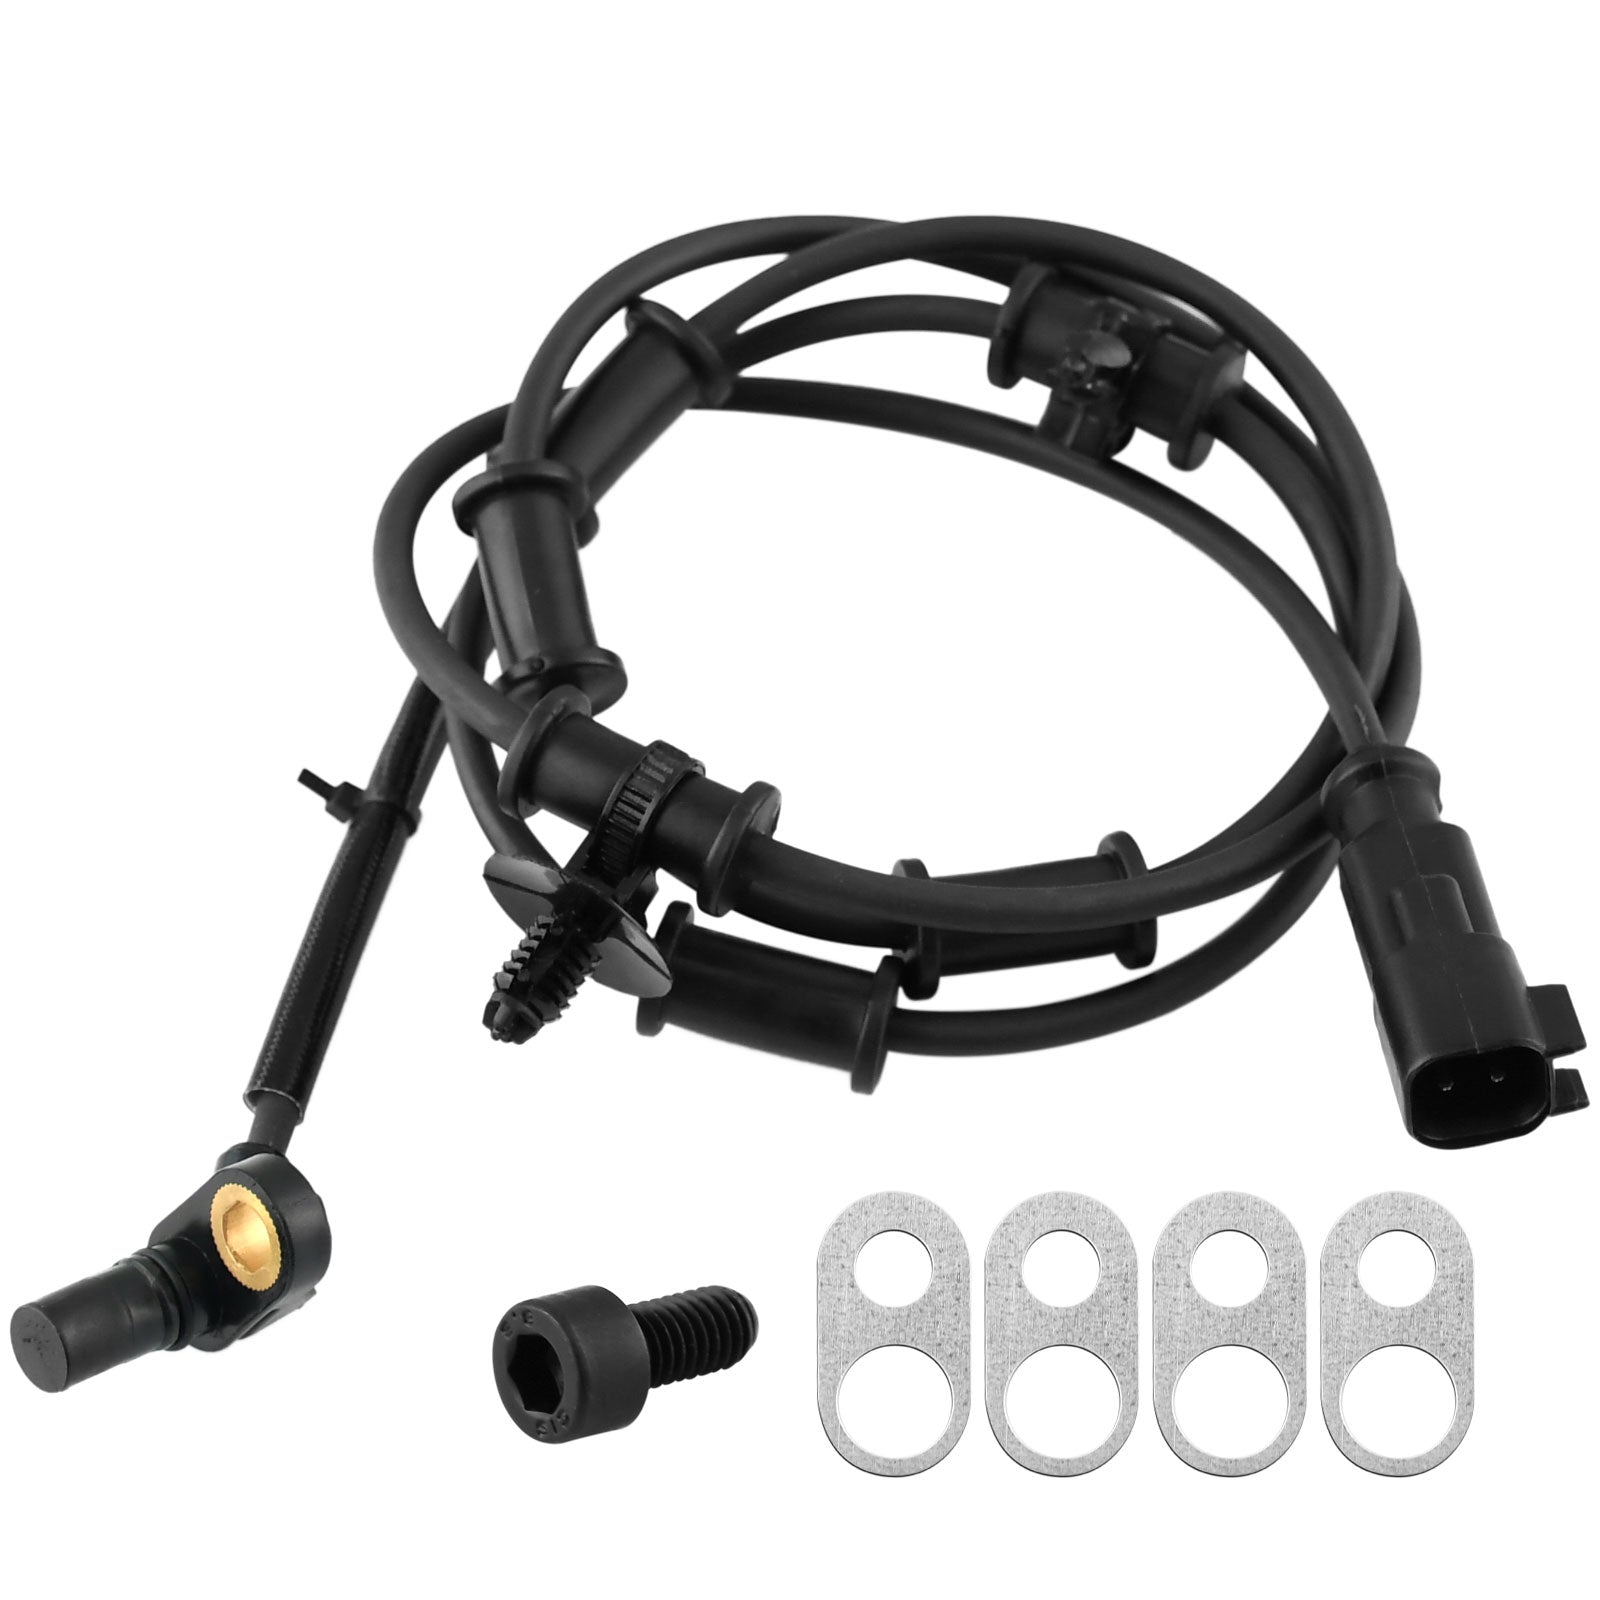 Front Wheel Speed ABS Sensor Fits for Dodge Ram 2500 3500 Pickup, Ram 2500 3500-Wheel Speed ABS Assembly MotorbyMotor